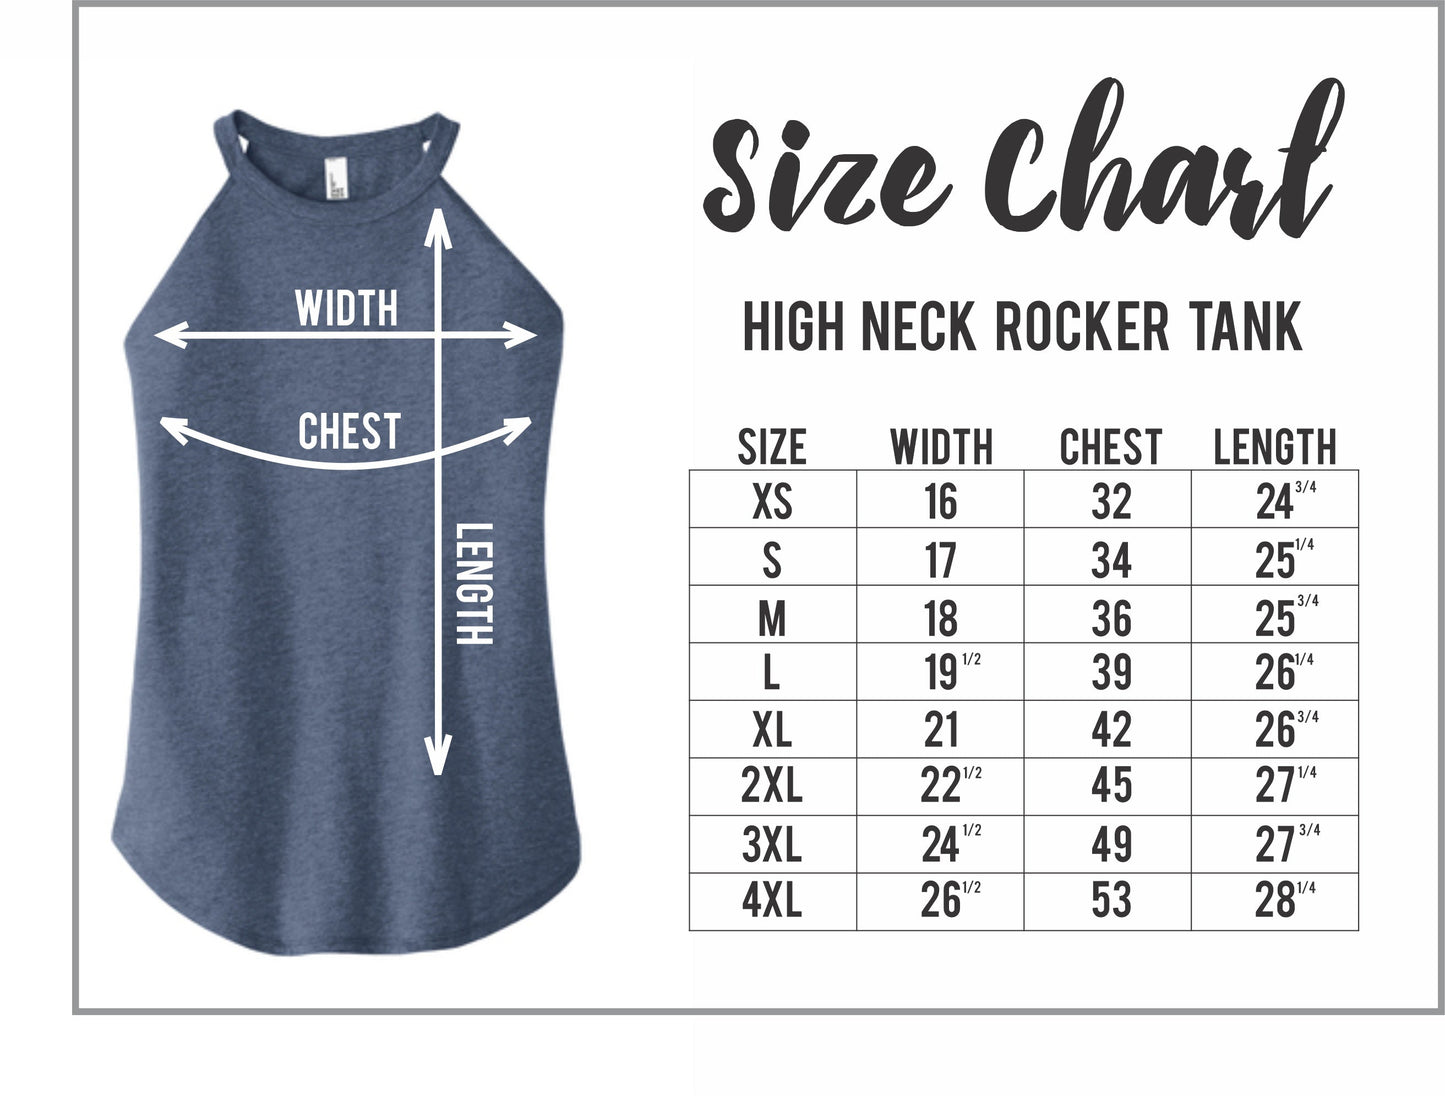 Good Things Come To Those Who Sweat  - High Neck Rocker Tank